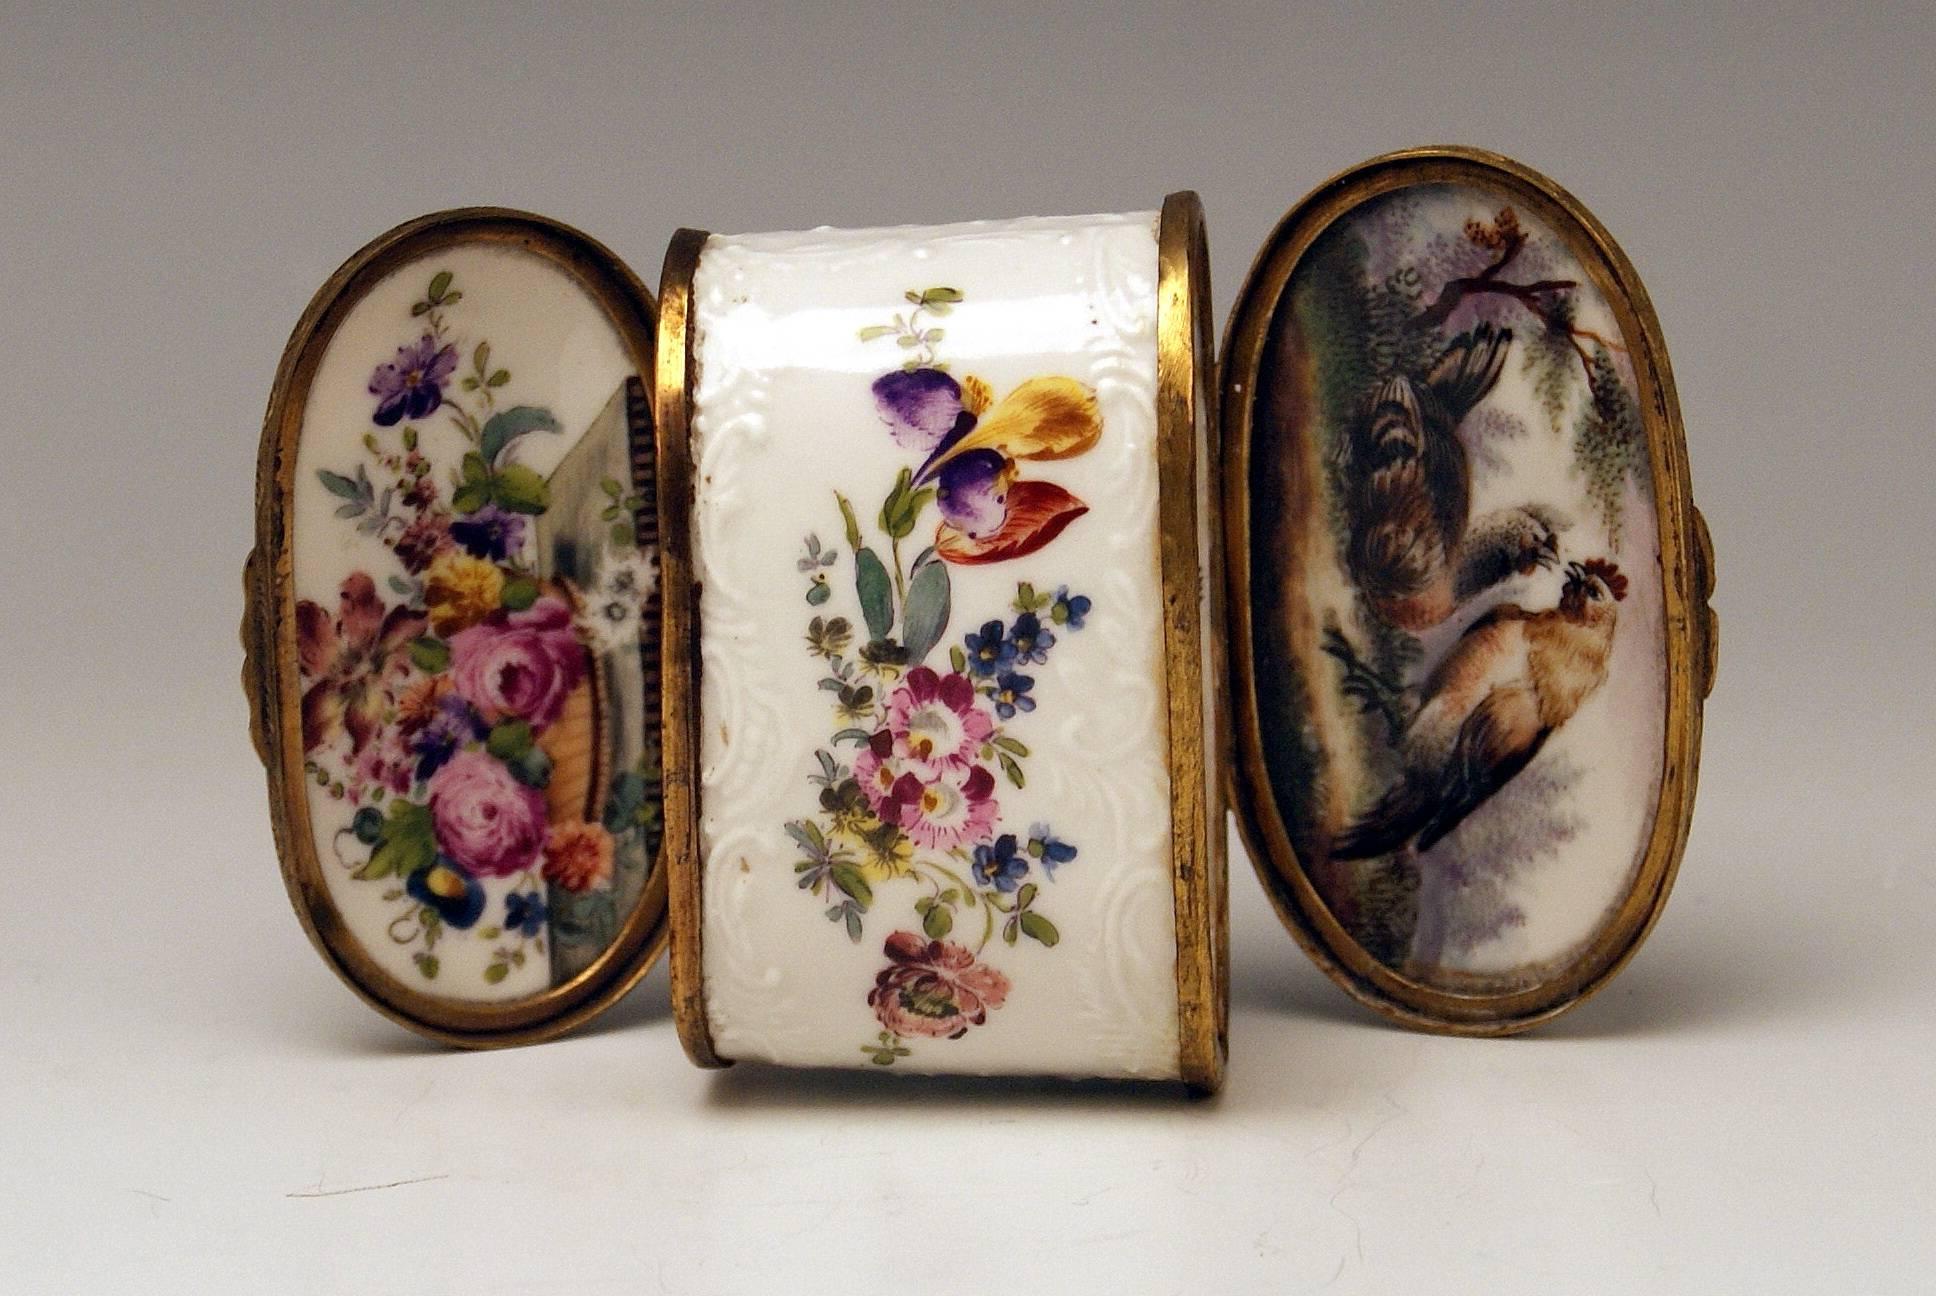 Meissen Gorgeous Dual Lidded Rococo Box with Multicolored Paintings and Decorations of Relief Type. 
The box is edged by brass mountings.
 
height:  6.0  cm   (= 2.36 inches) 
width:   8.0  cm   (= 3.14 inches) 
depth:   4.5  cm   (= 1.77 inches)